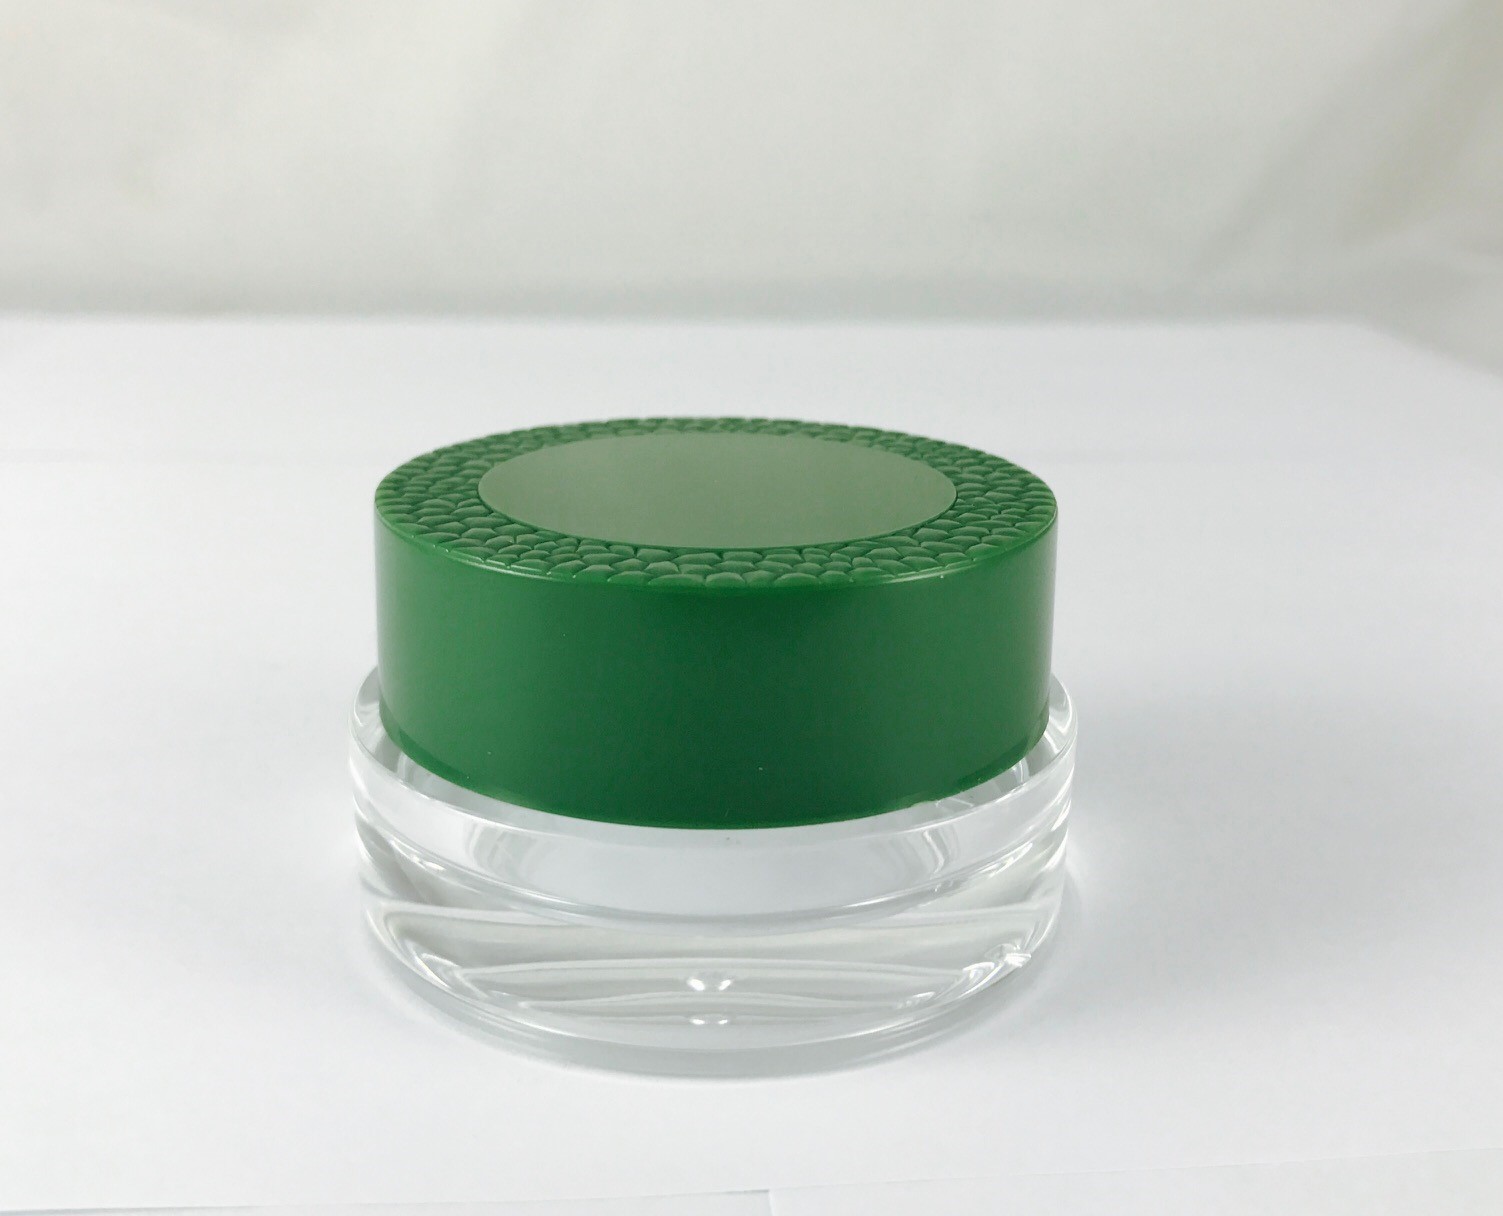 Round green injection cap